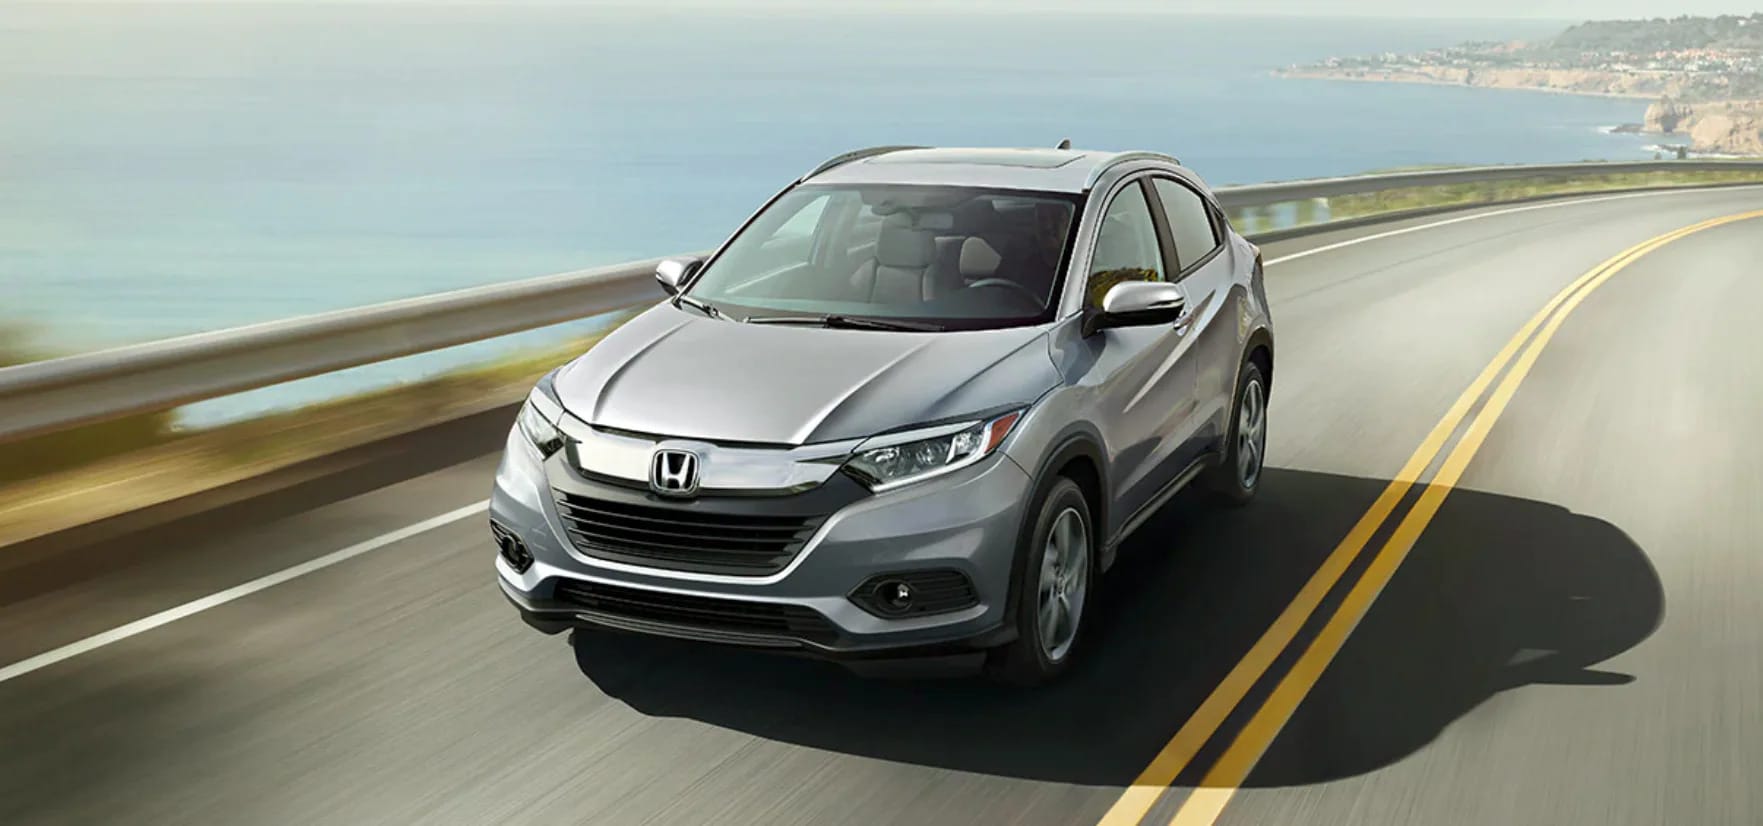 Silver Honda HR-V driving down a highway on a sunny day